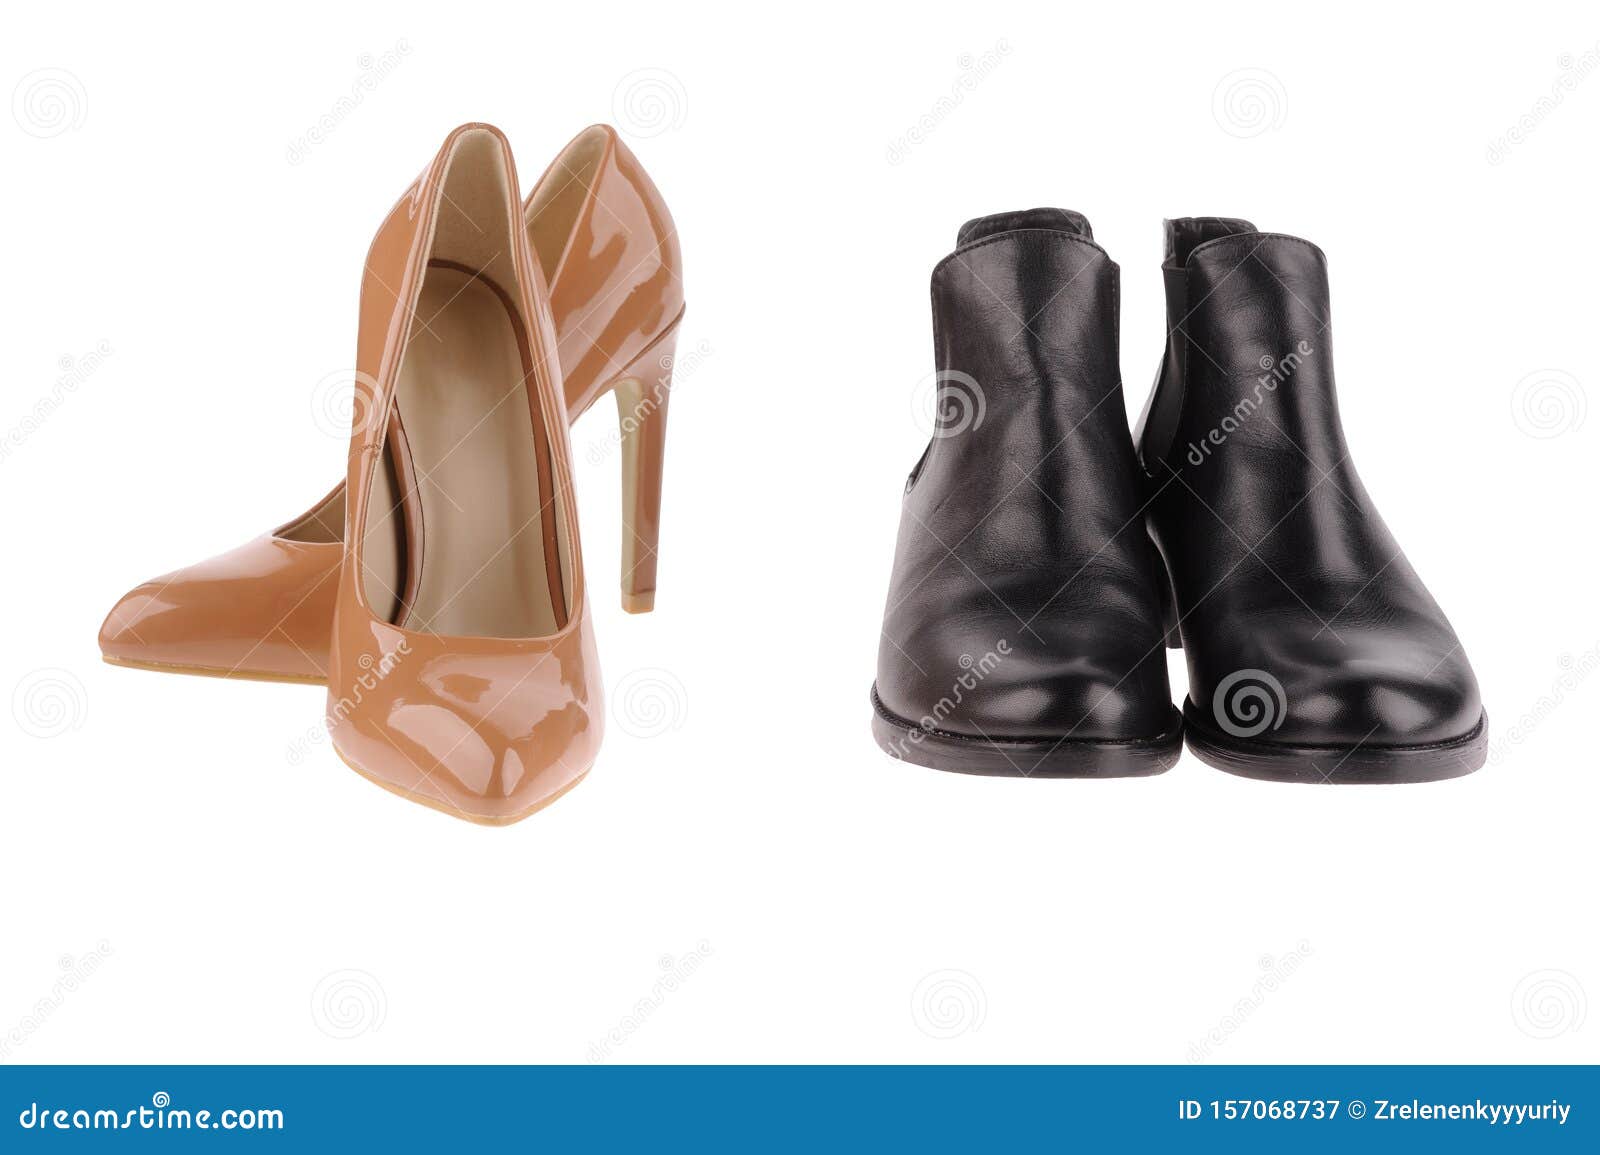 Beige And Black Women Shoes Stock Image Image of adult